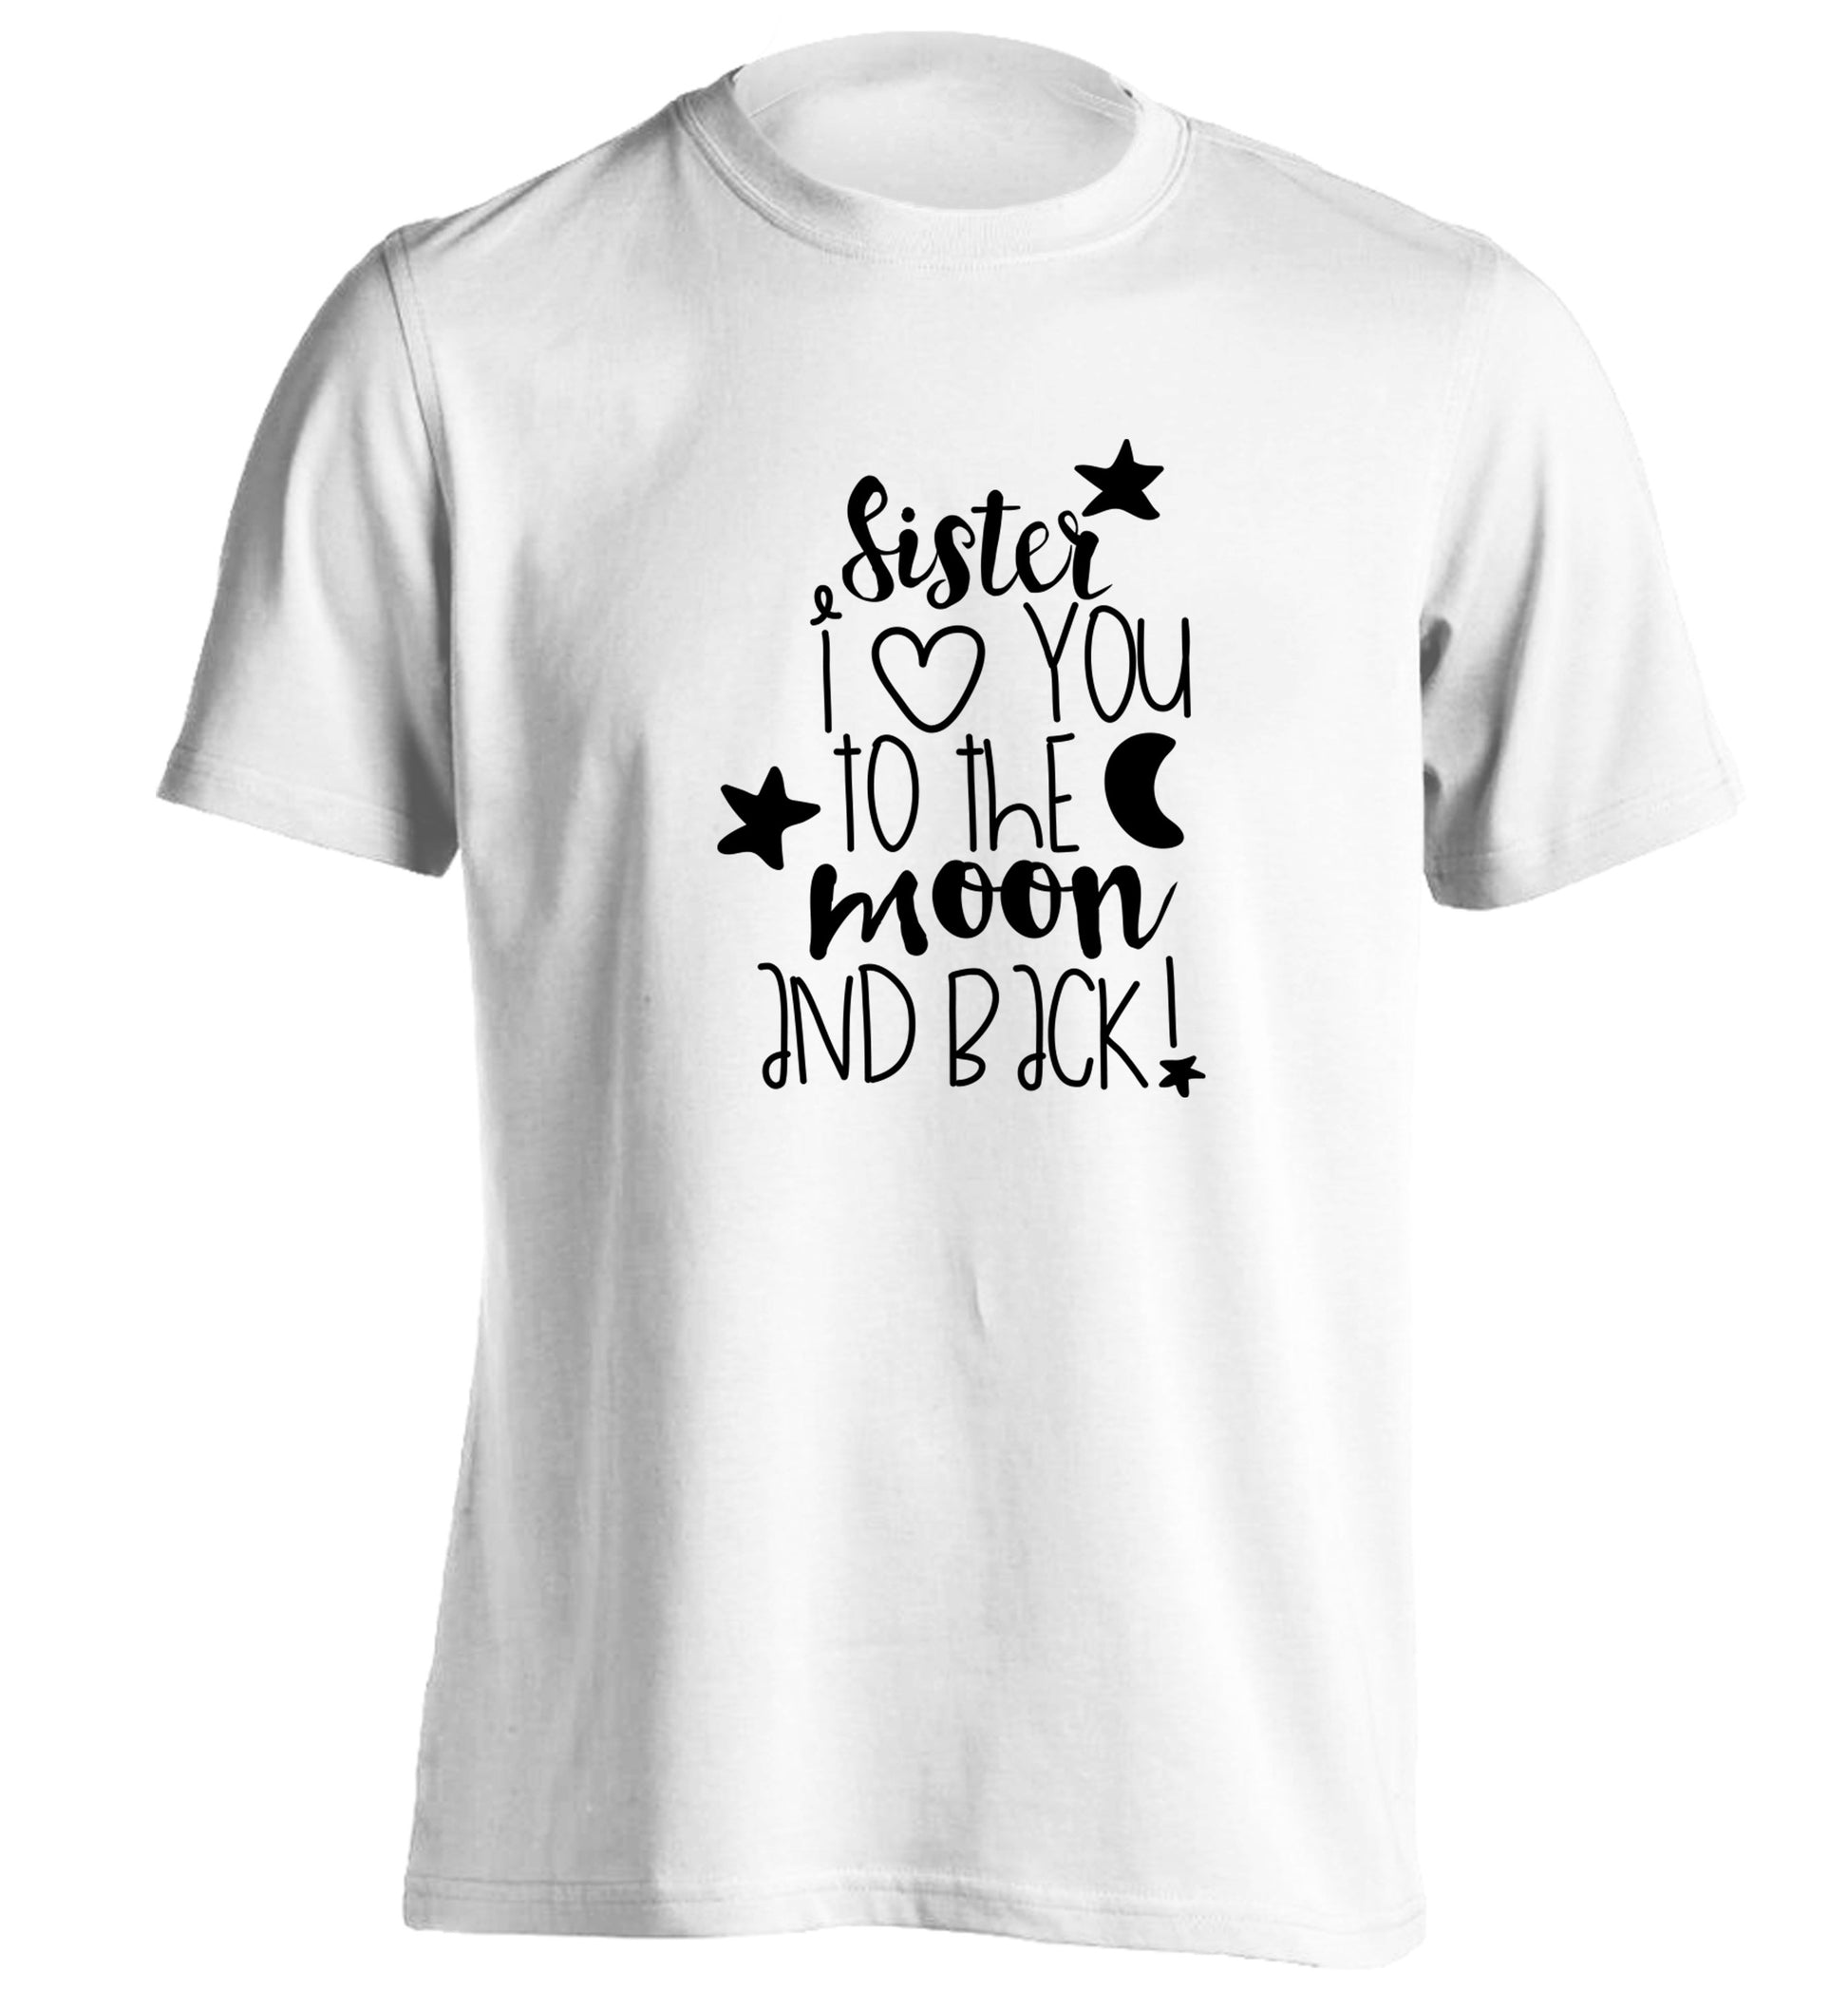 Sister I love you to the moon and back adults unisex white Tshirt 2XL